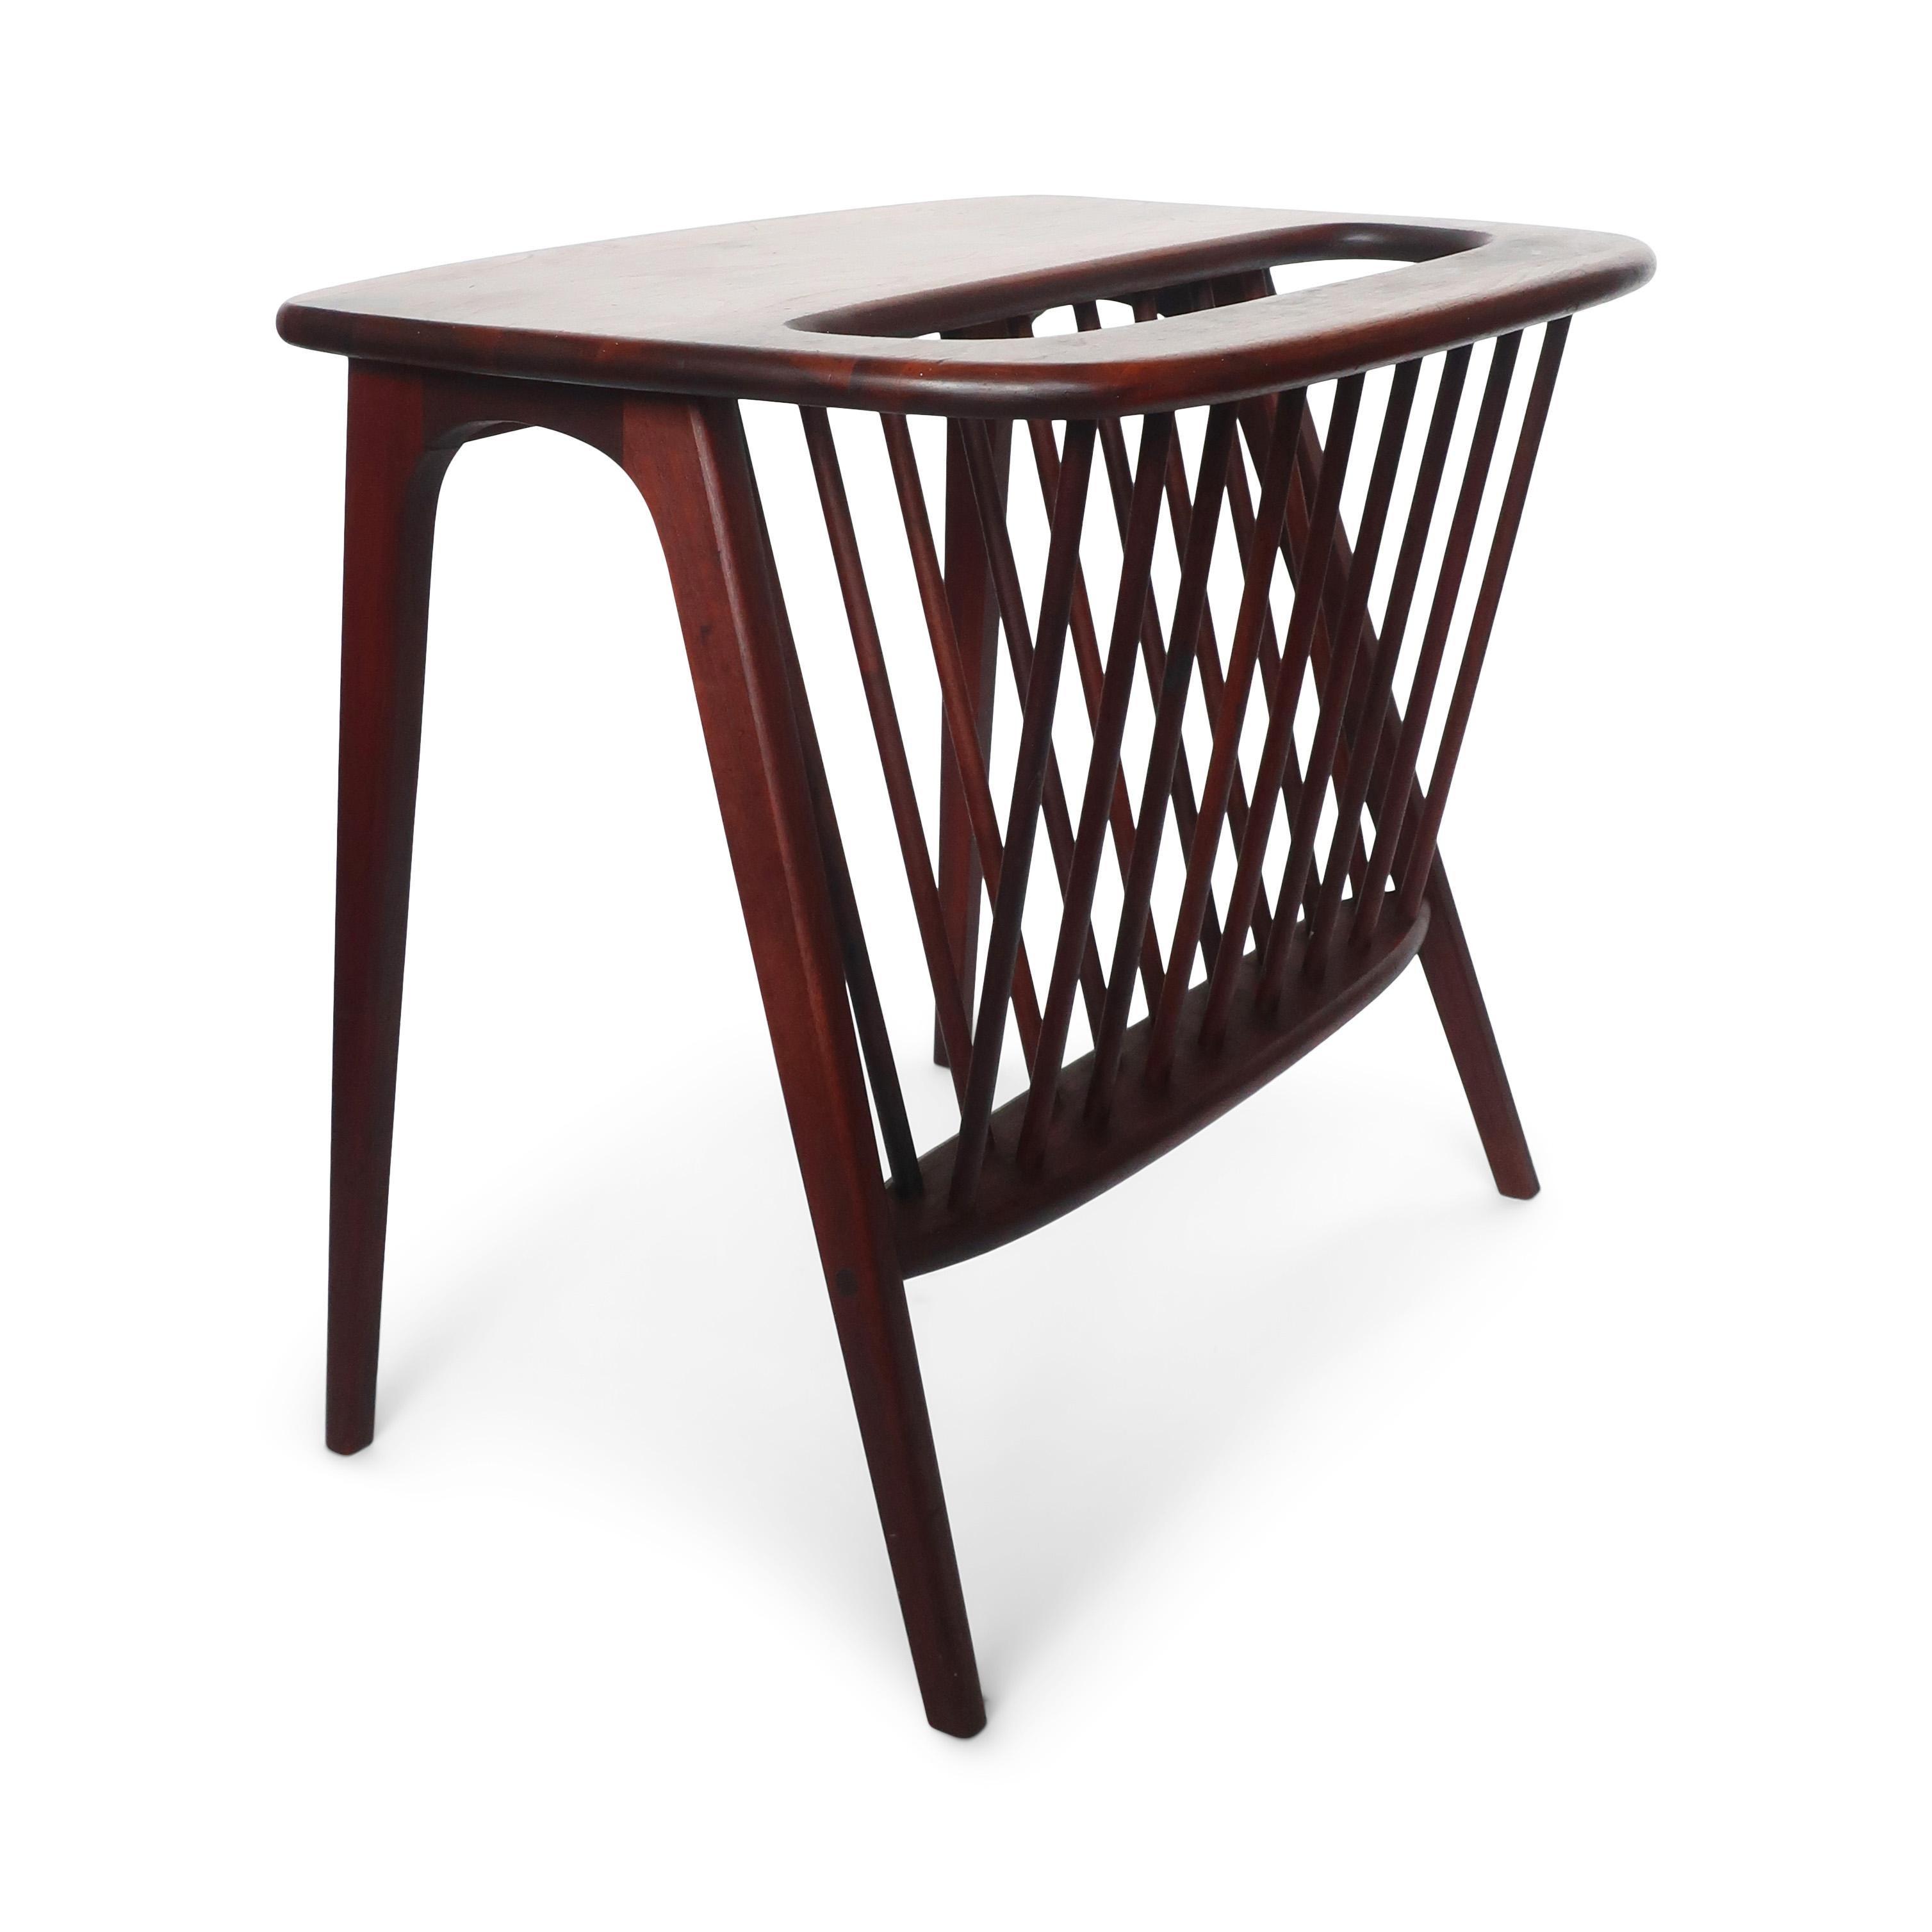 A stunning solid wood Arthur Umanoff style magazine rack side table, likely in walnut or teak. With an organically shaped frame, table top, and legs, this table highlights the vibrant grain pattern on the table's surface and allows for ample storage